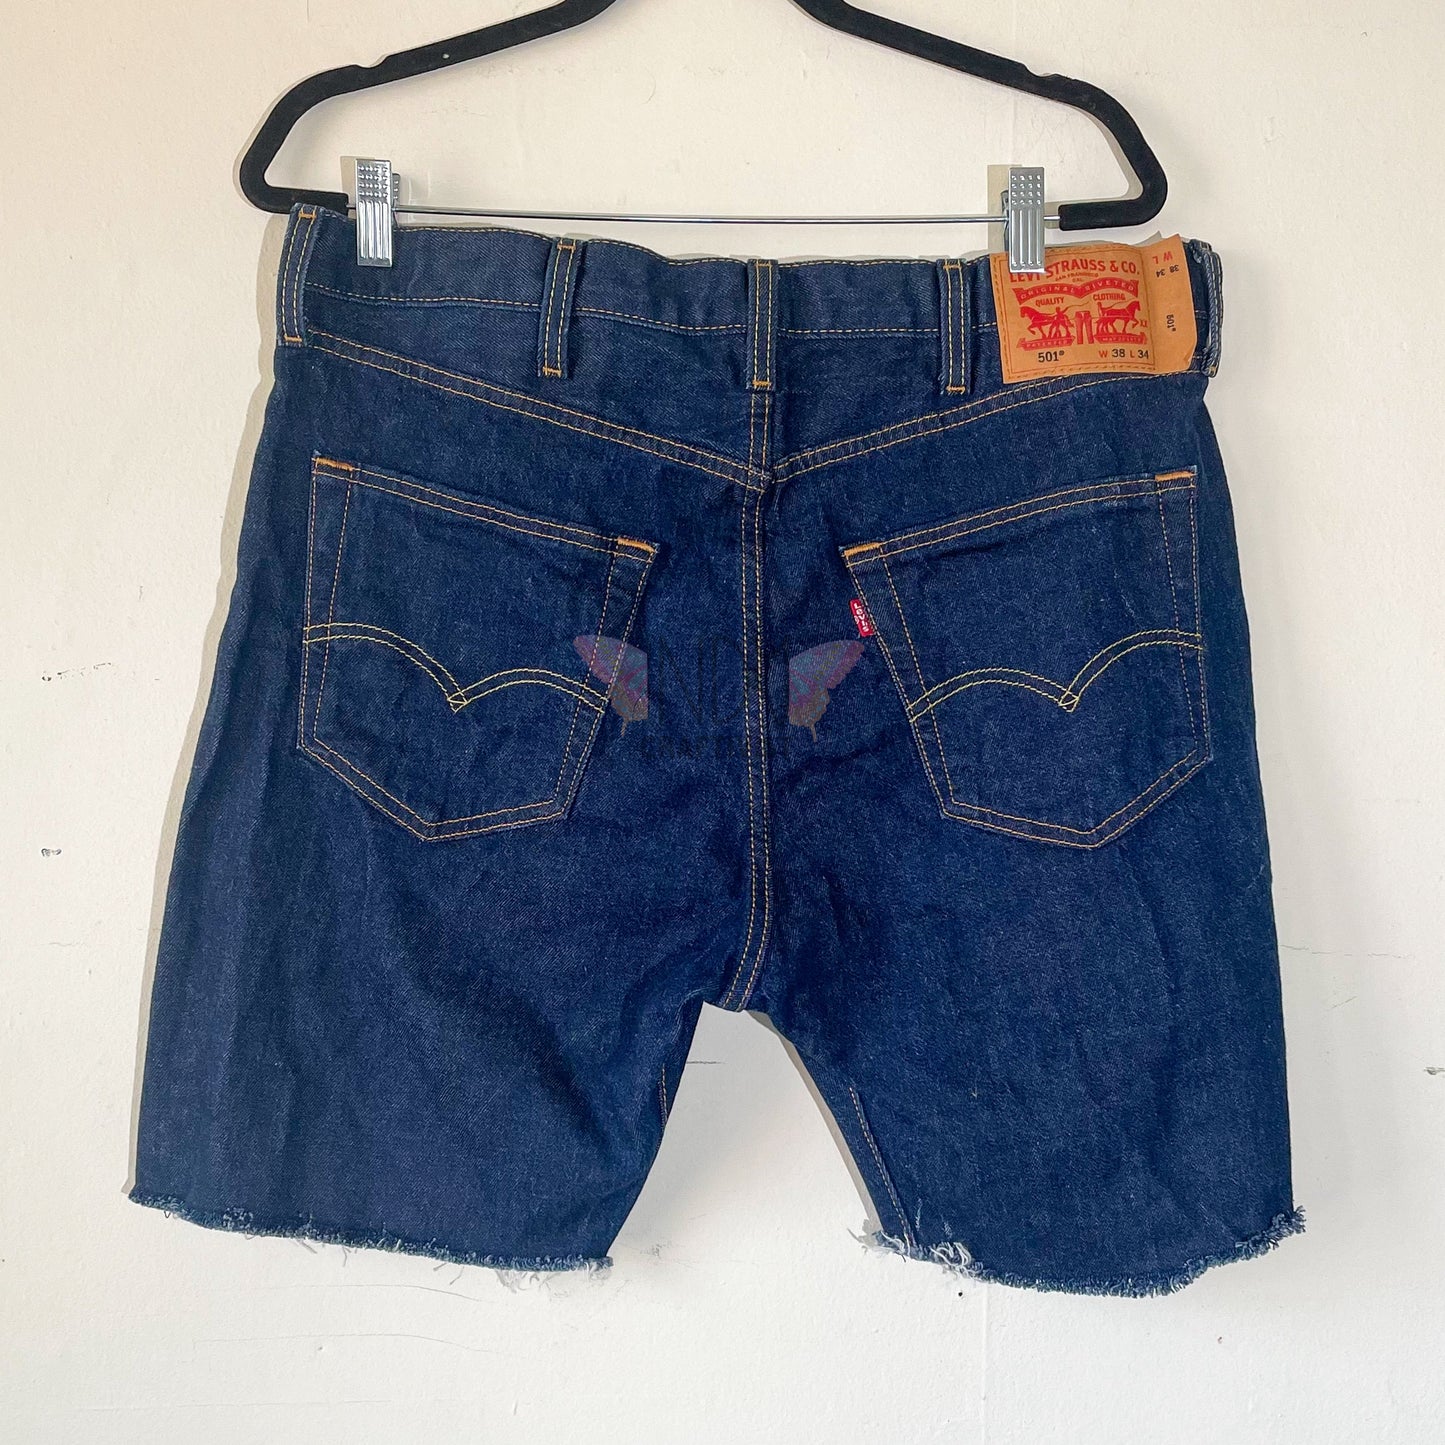 Levi's Upcycled Denim Shorts with Care Bear Heart